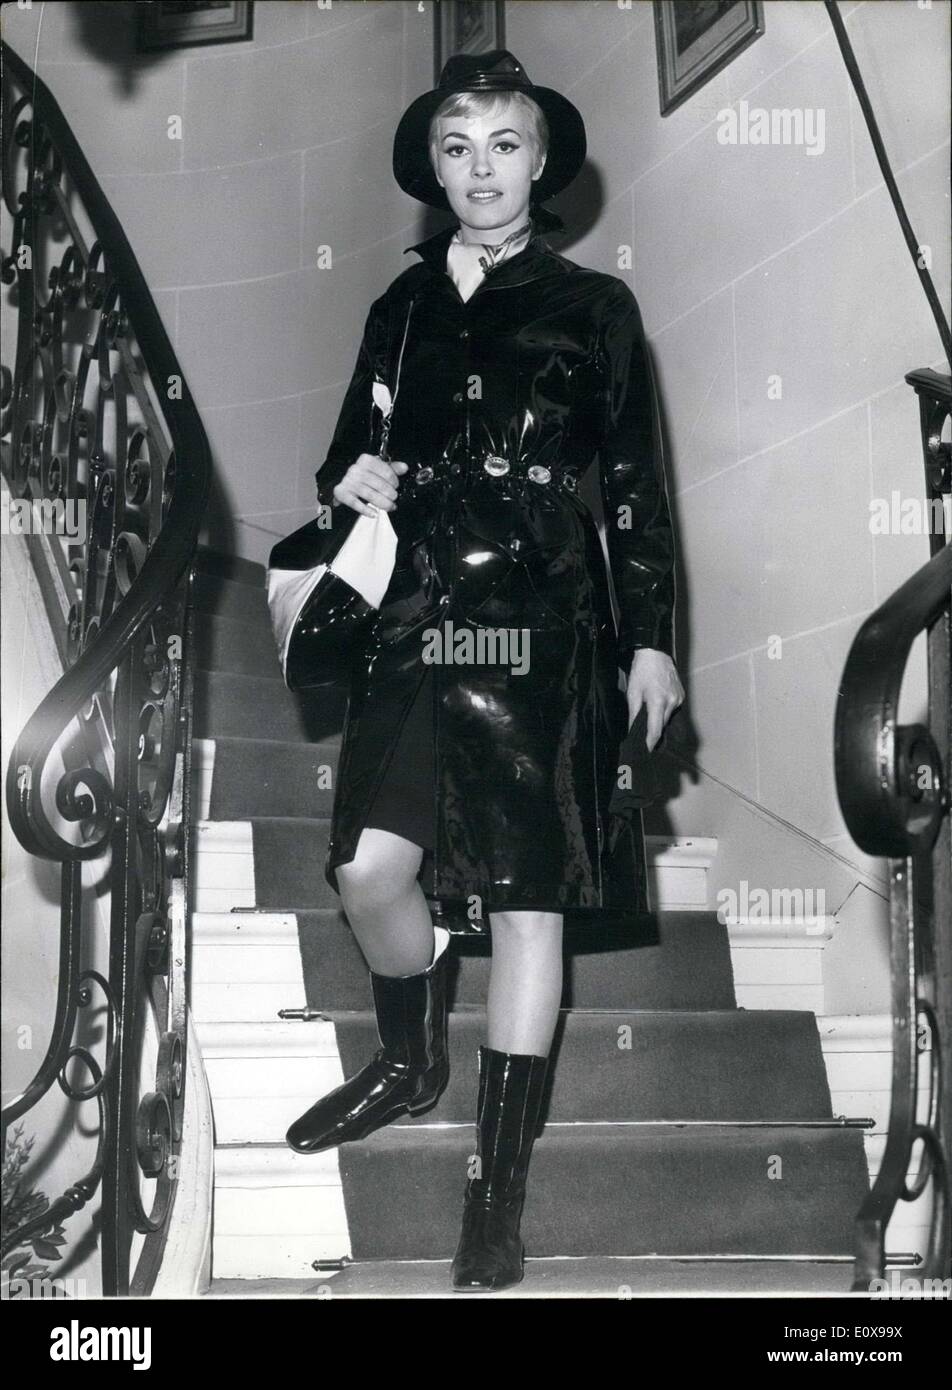 Dec. 06, 1965 - Michele Mercier is pictured here dressed in black from head to toe as she descends the stairs during shooting for her latest film. Stock Photo